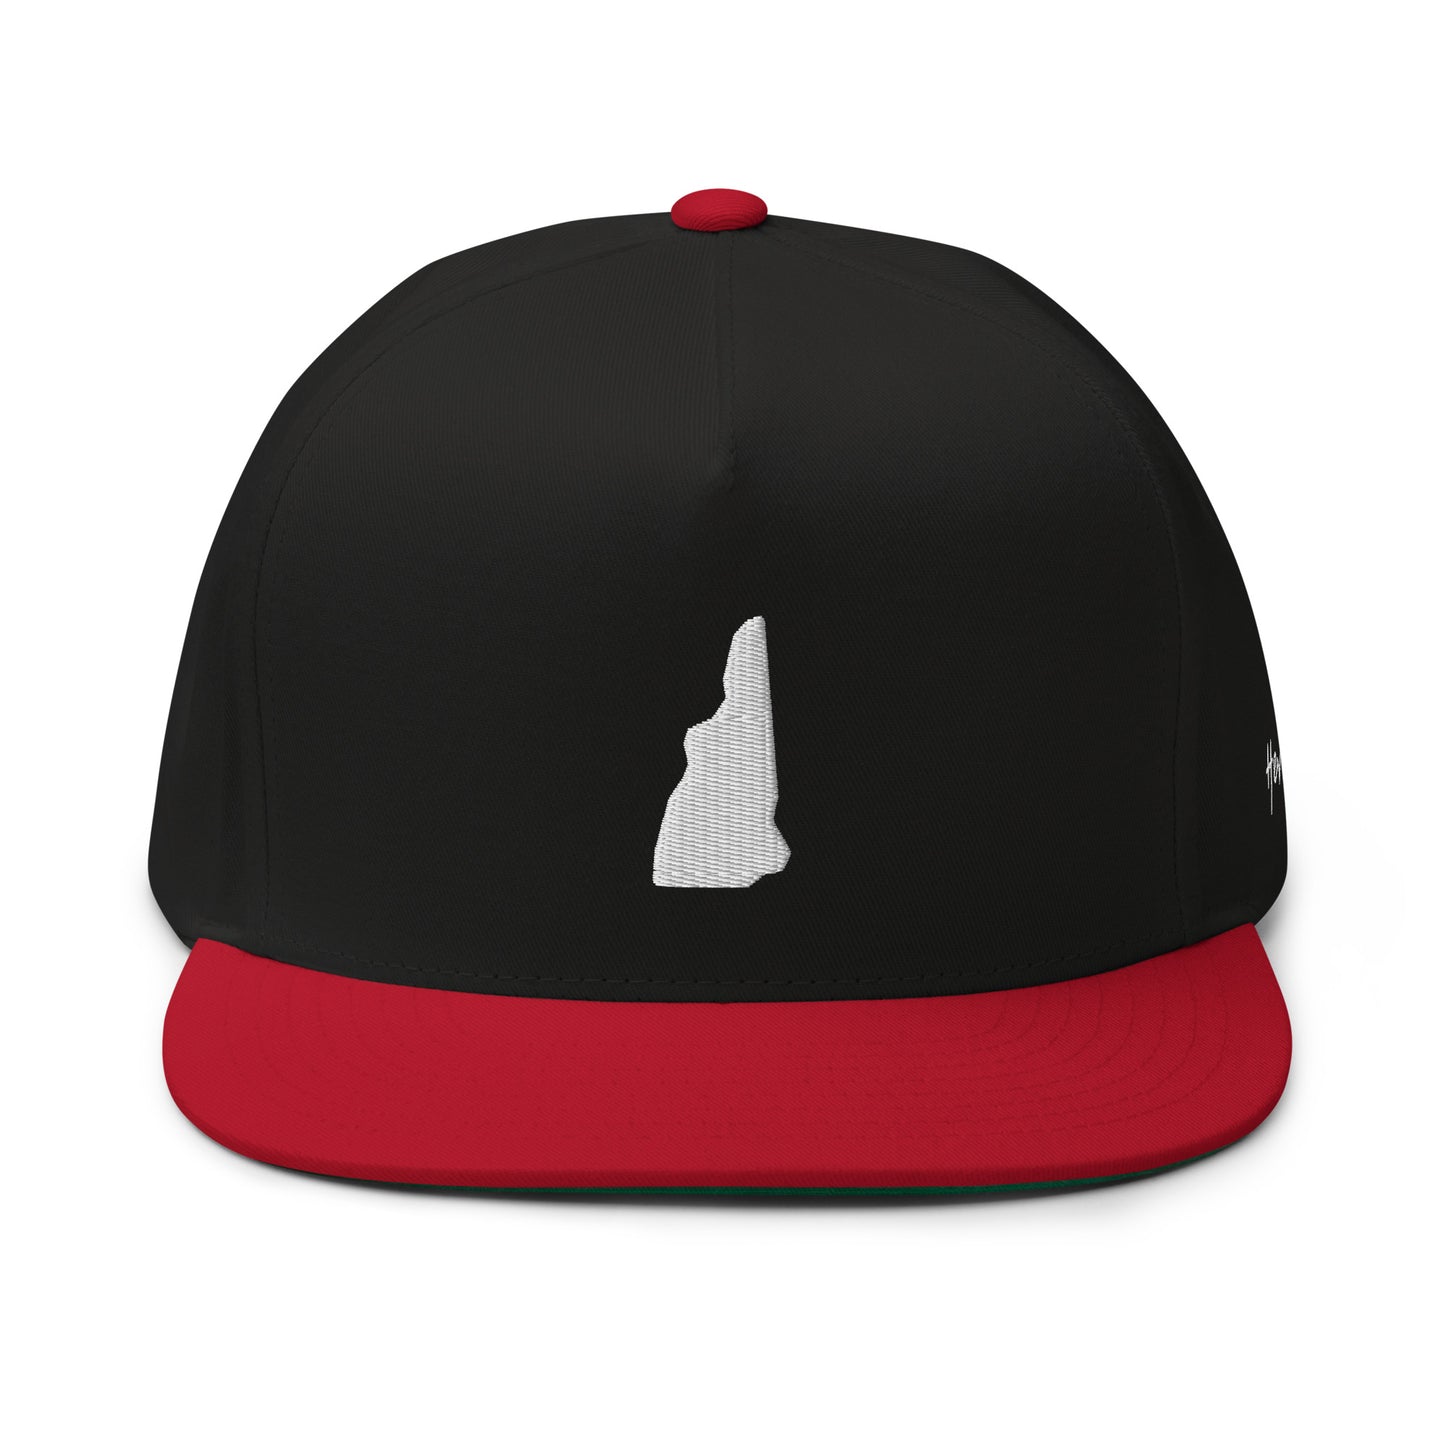 New Hampshire State Silhouette 5 Panel A-Frame Snapback Hat